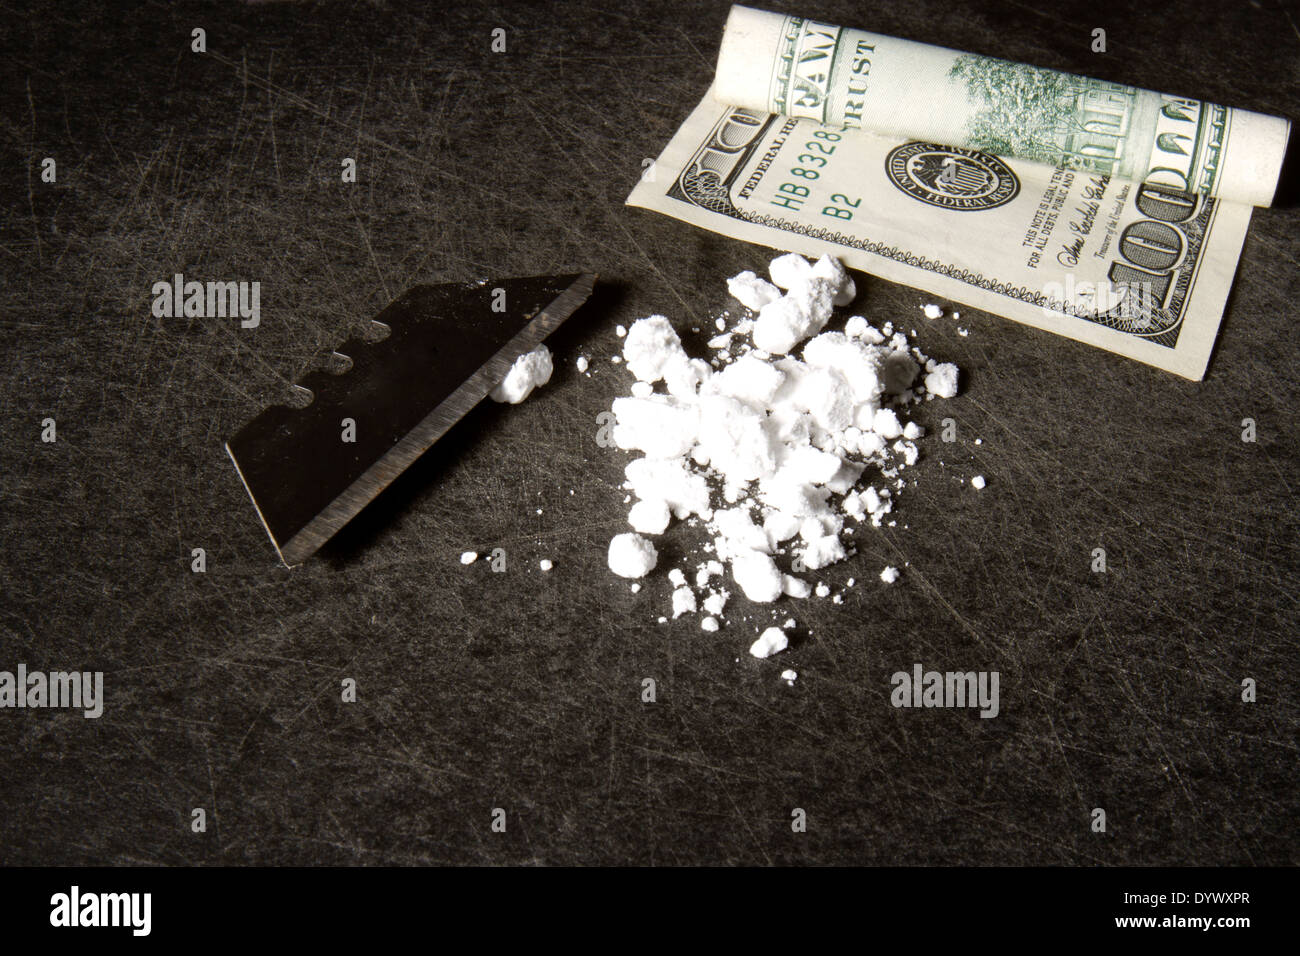 A Line Of Cocaine Powder Single Bullet And Dollar Bill Scroll On